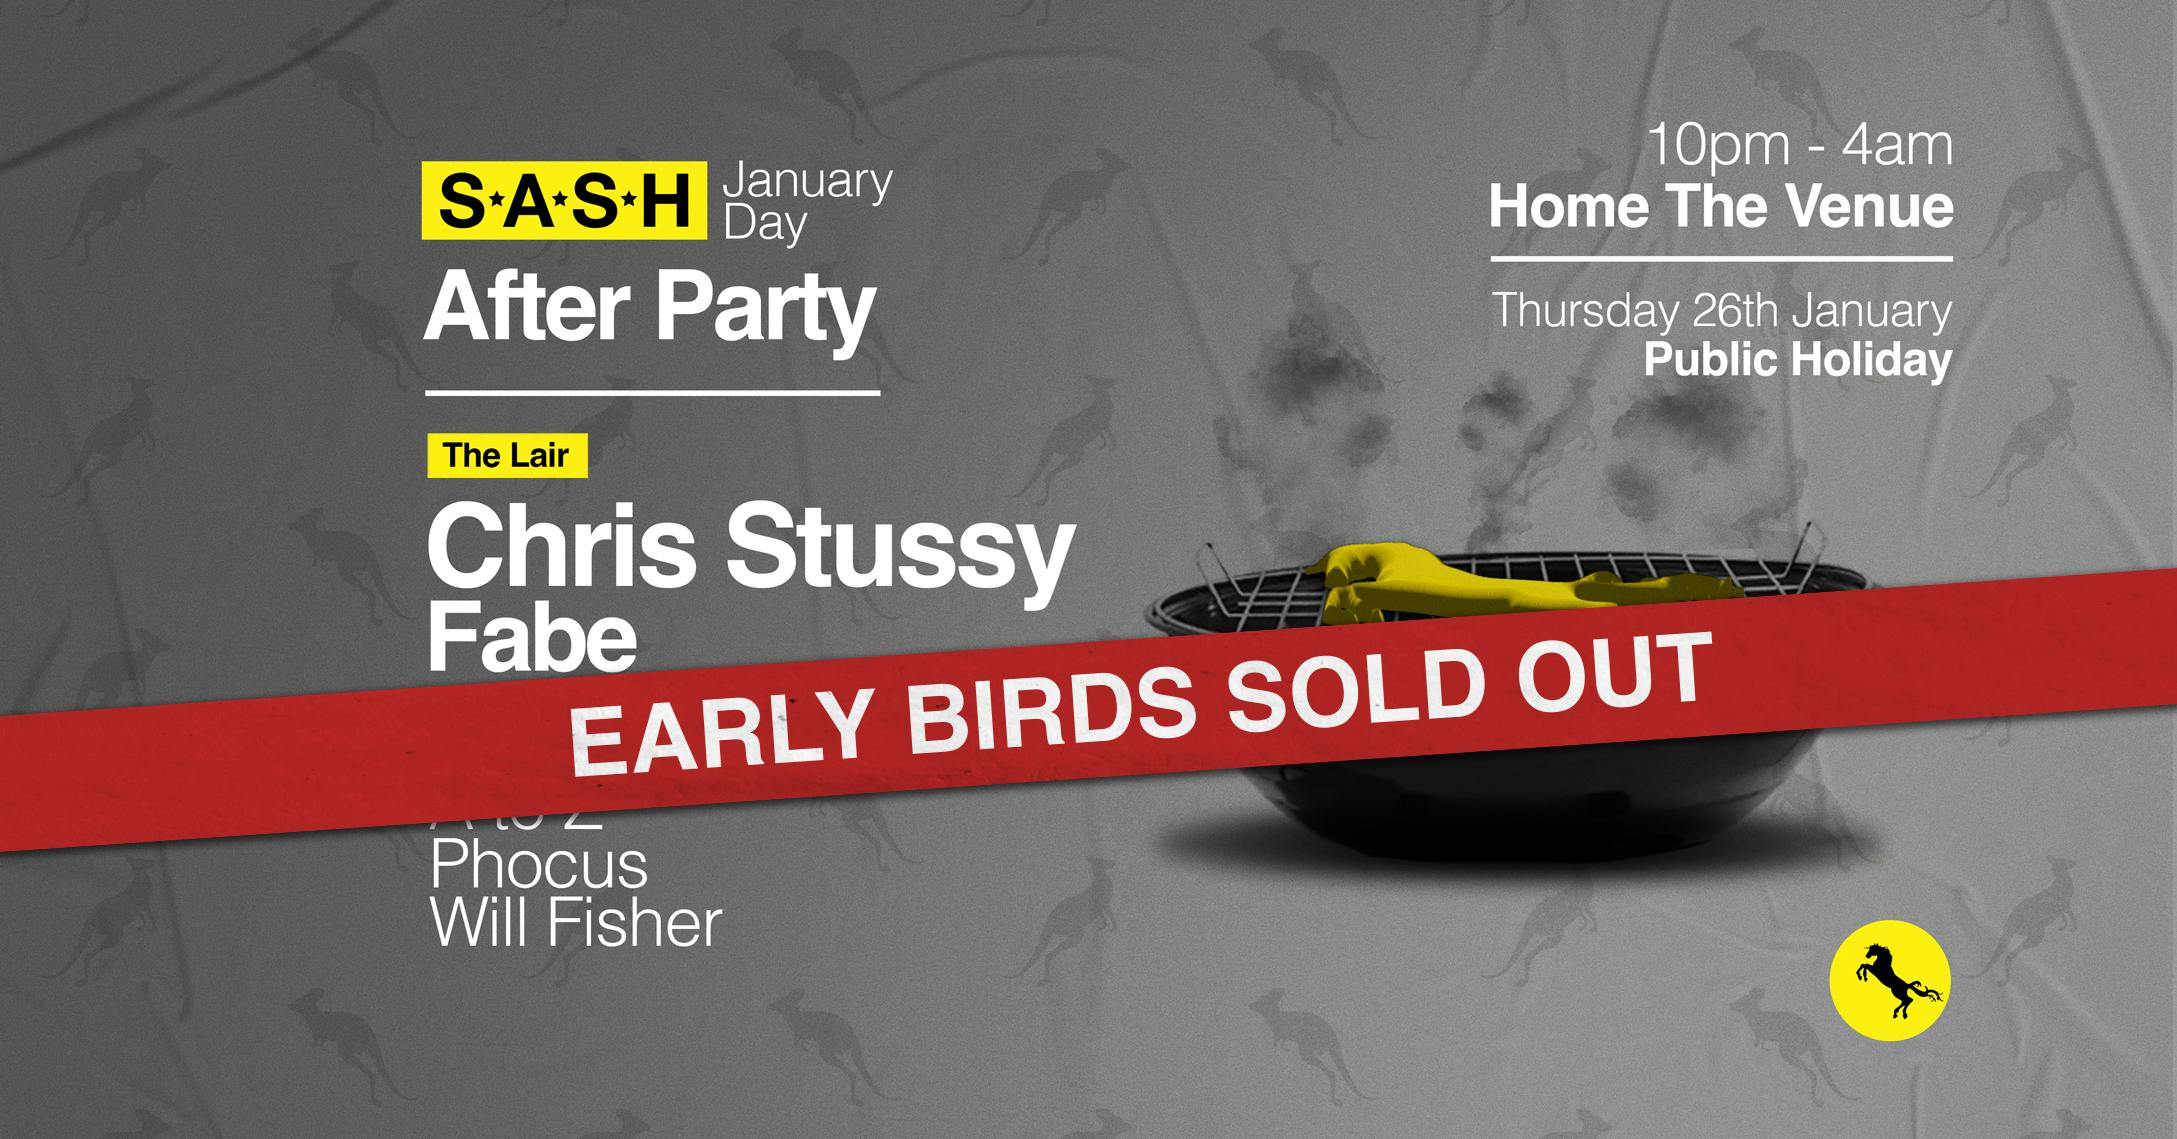 ★ S.A.S.H JANUARY DAY AFTER PARTY ★ CHRIS STUSSY ★ FABE ★ 